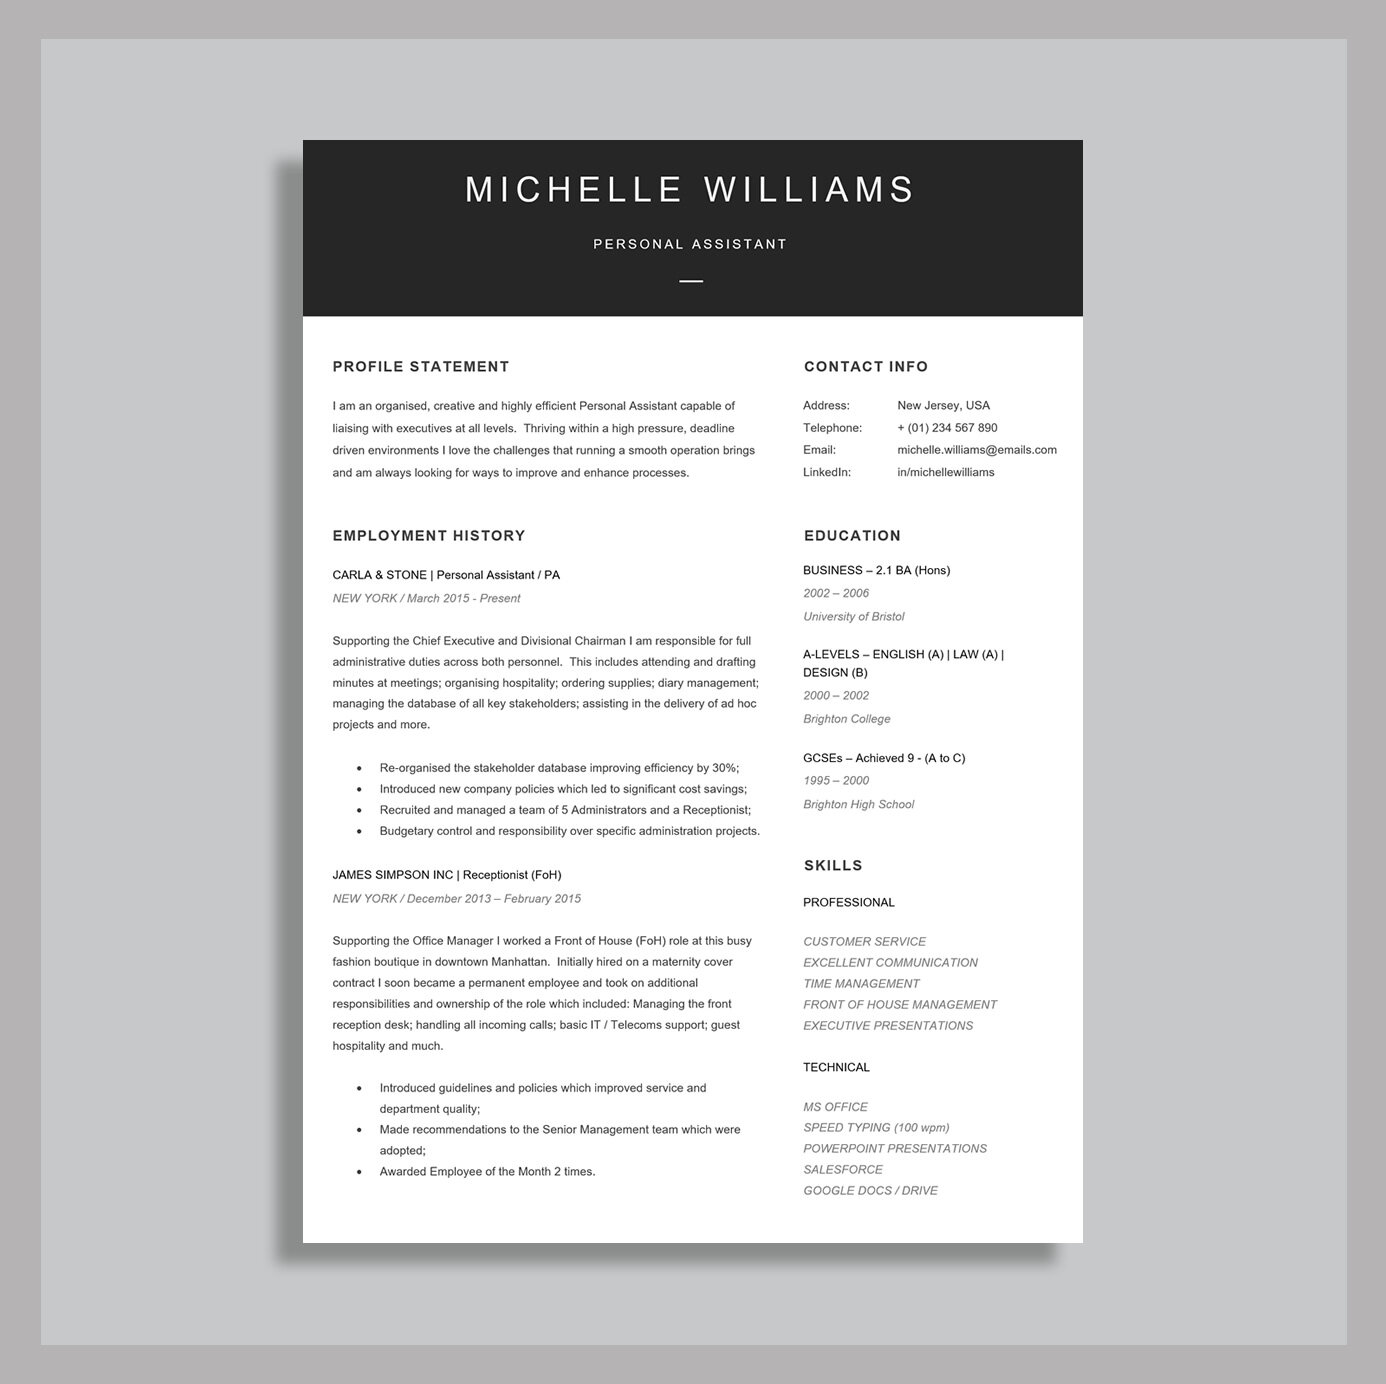 Cv Templates Designs Layouts Advice Free Downloads And More